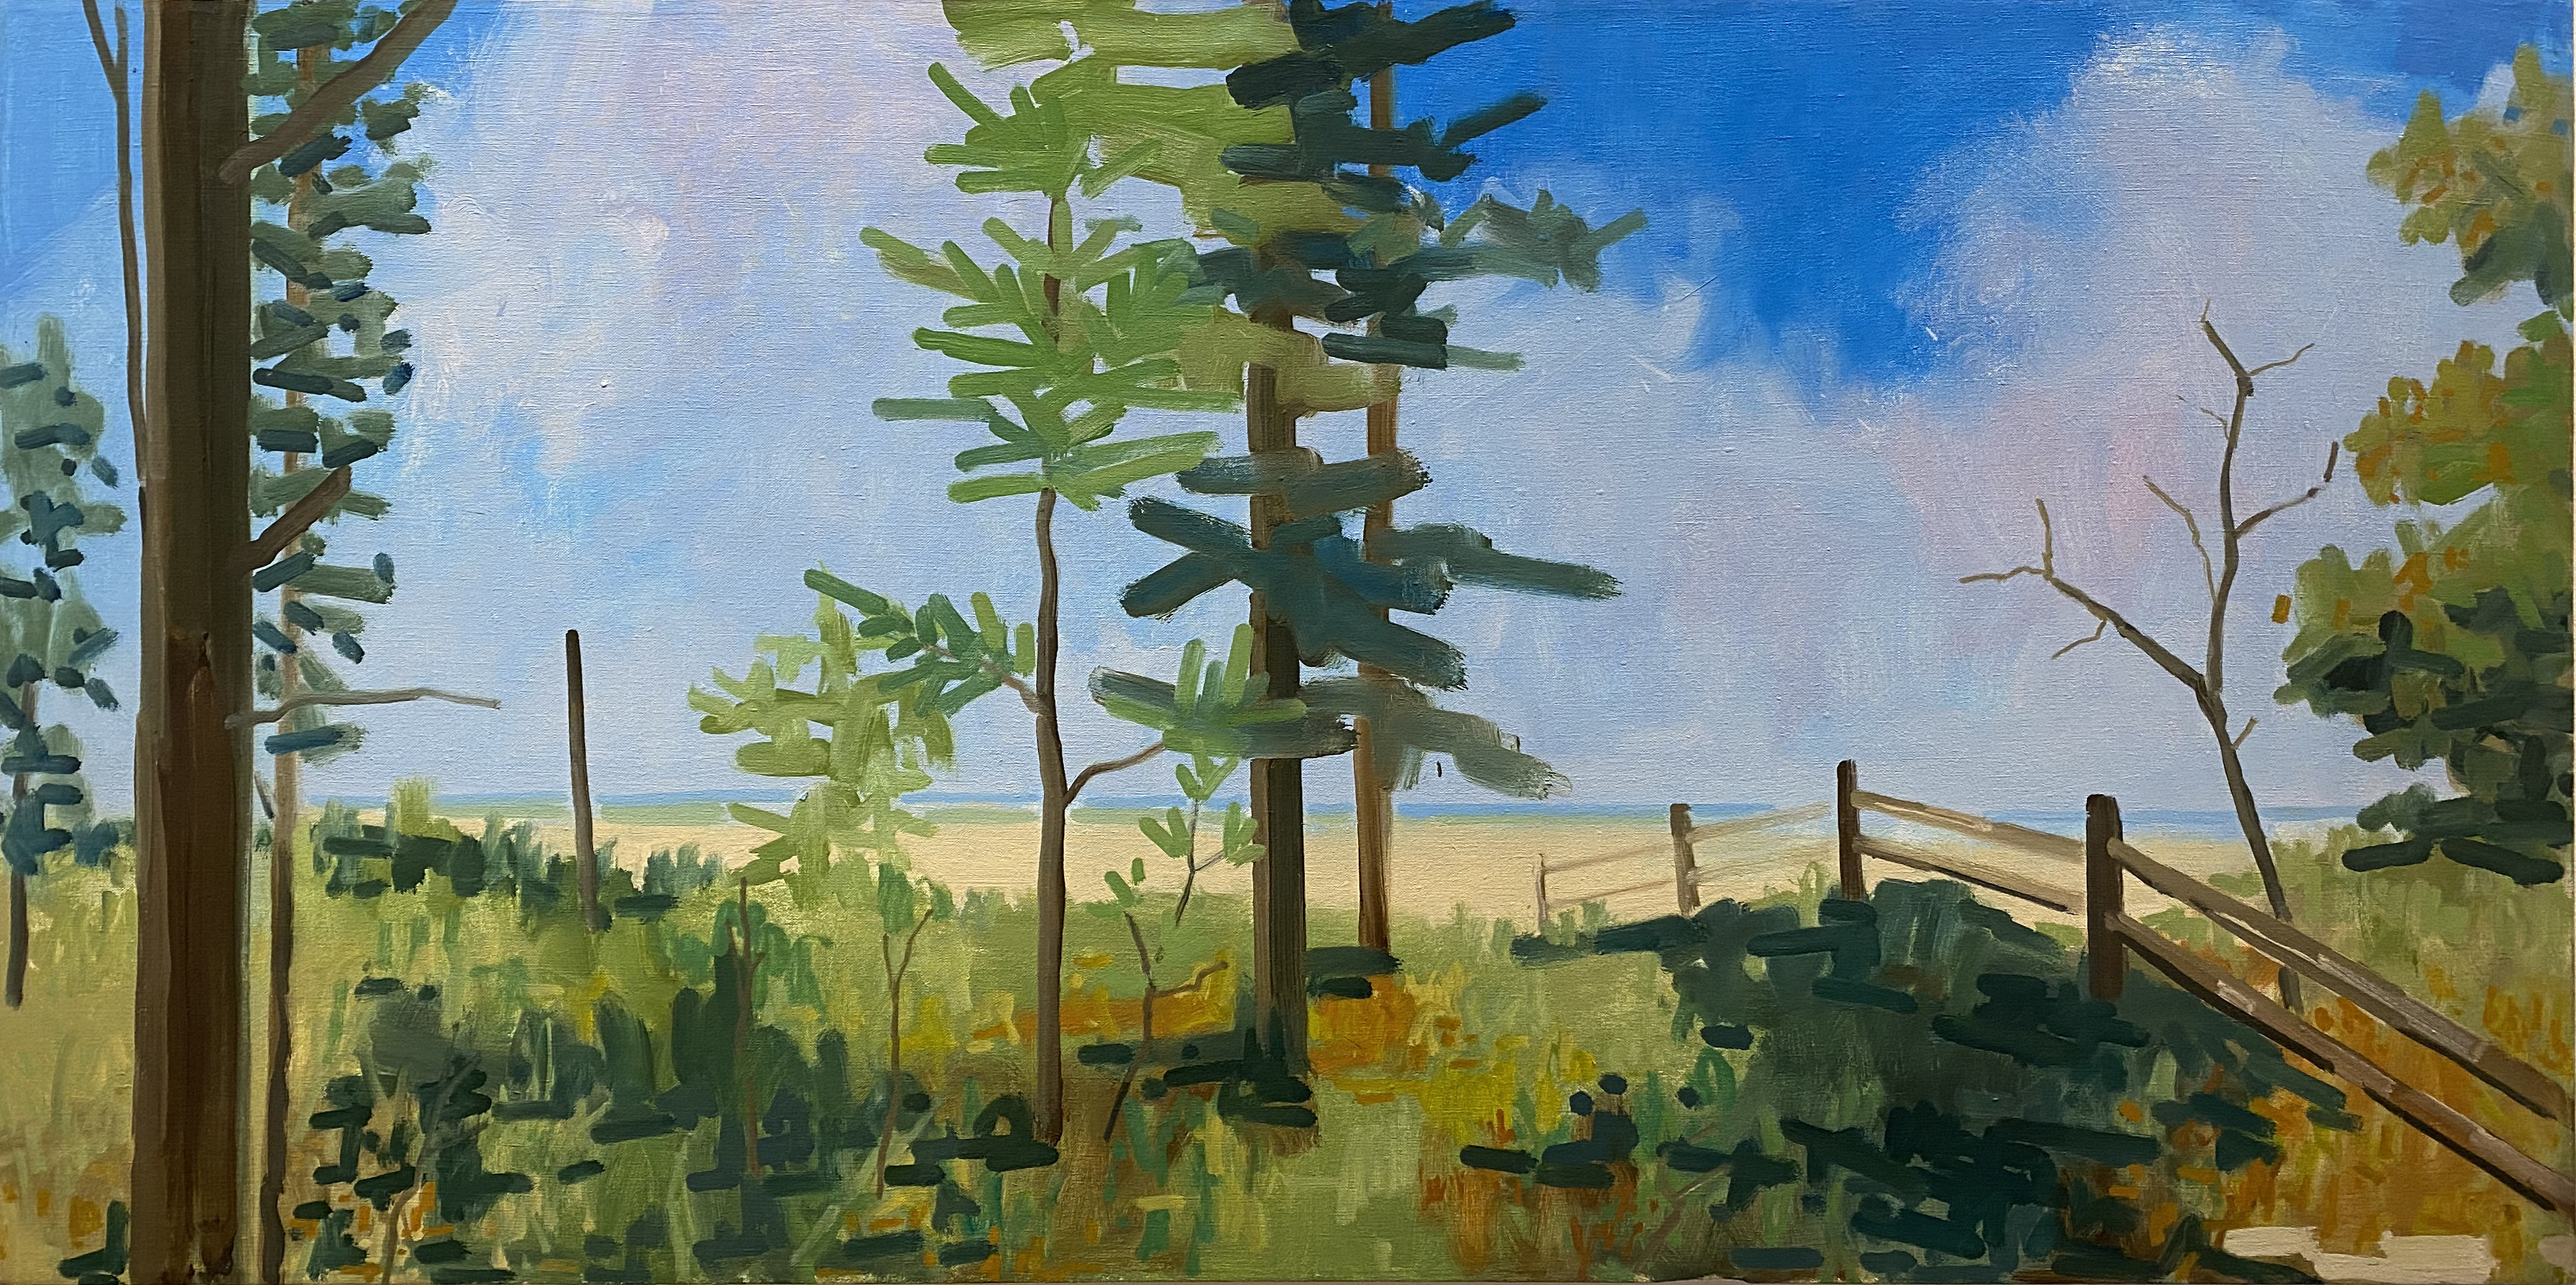 OLD FENCE LINE, oil on canvas, 24 x 48 inches